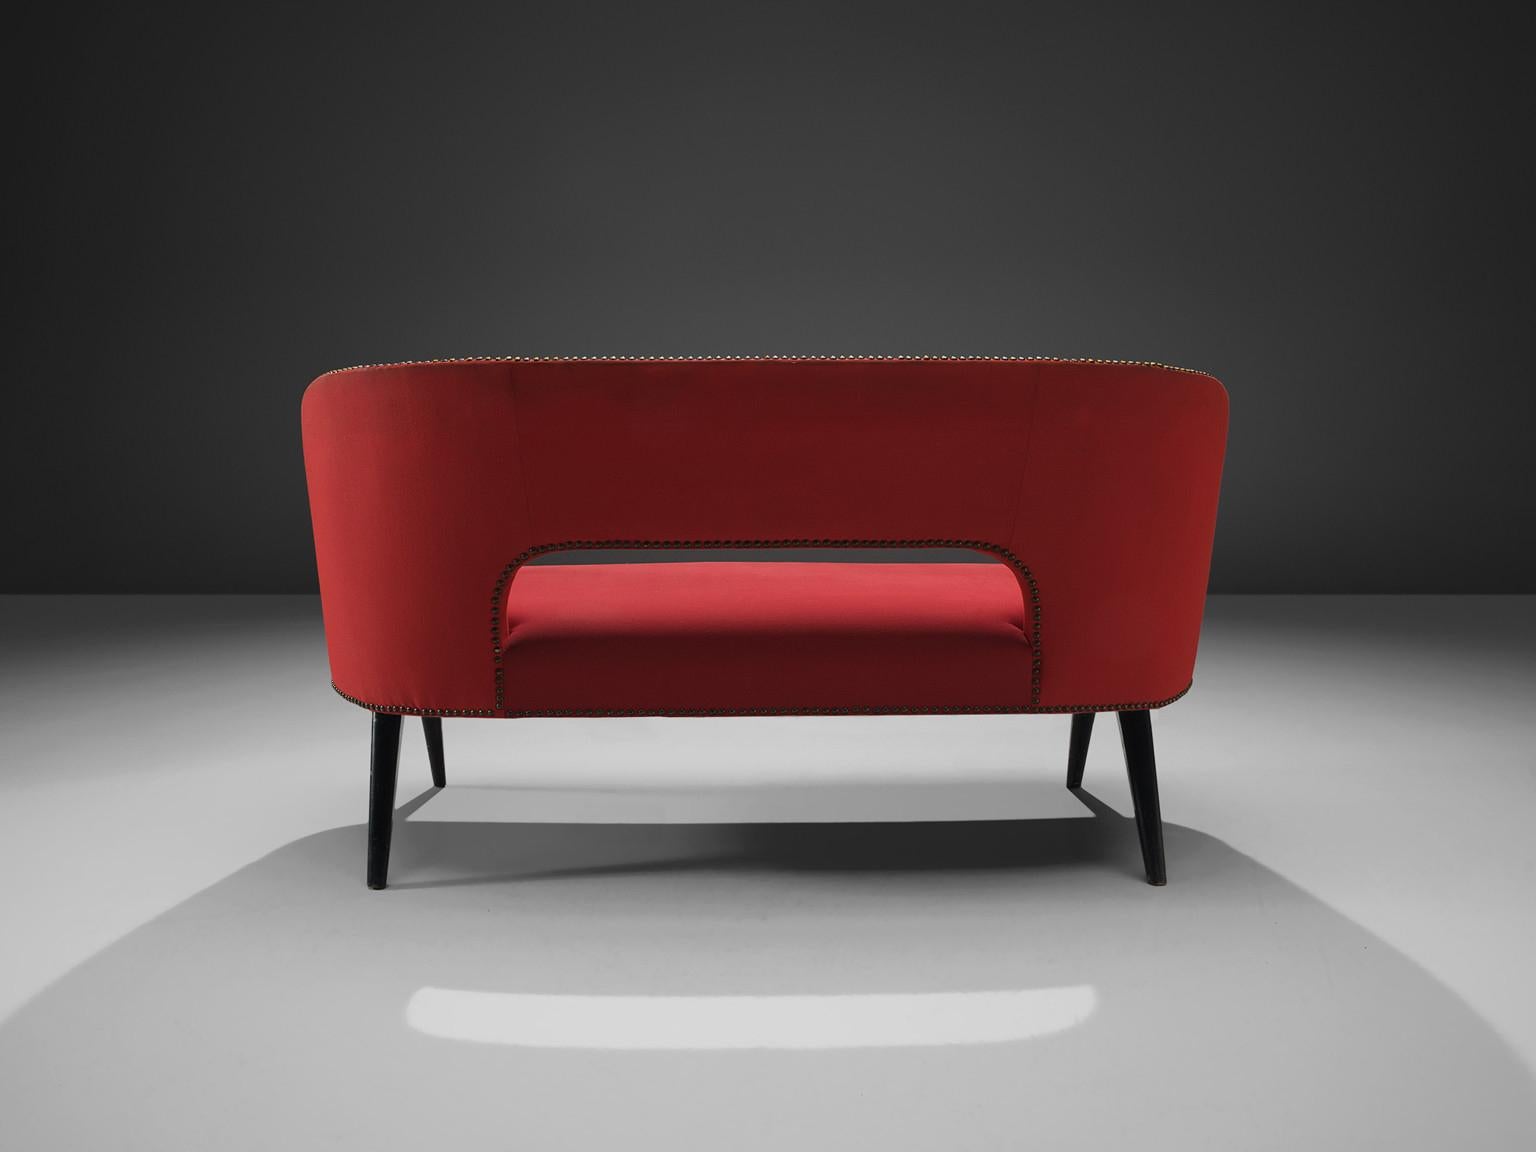 Settee, red fabric, wood, metal, Italy, circa 1960

This elegant Italian two-seat settee features a striking red color and can be placed in an entranceway or serve as a taste of delicateness in any room. The design has a clear construction mainly